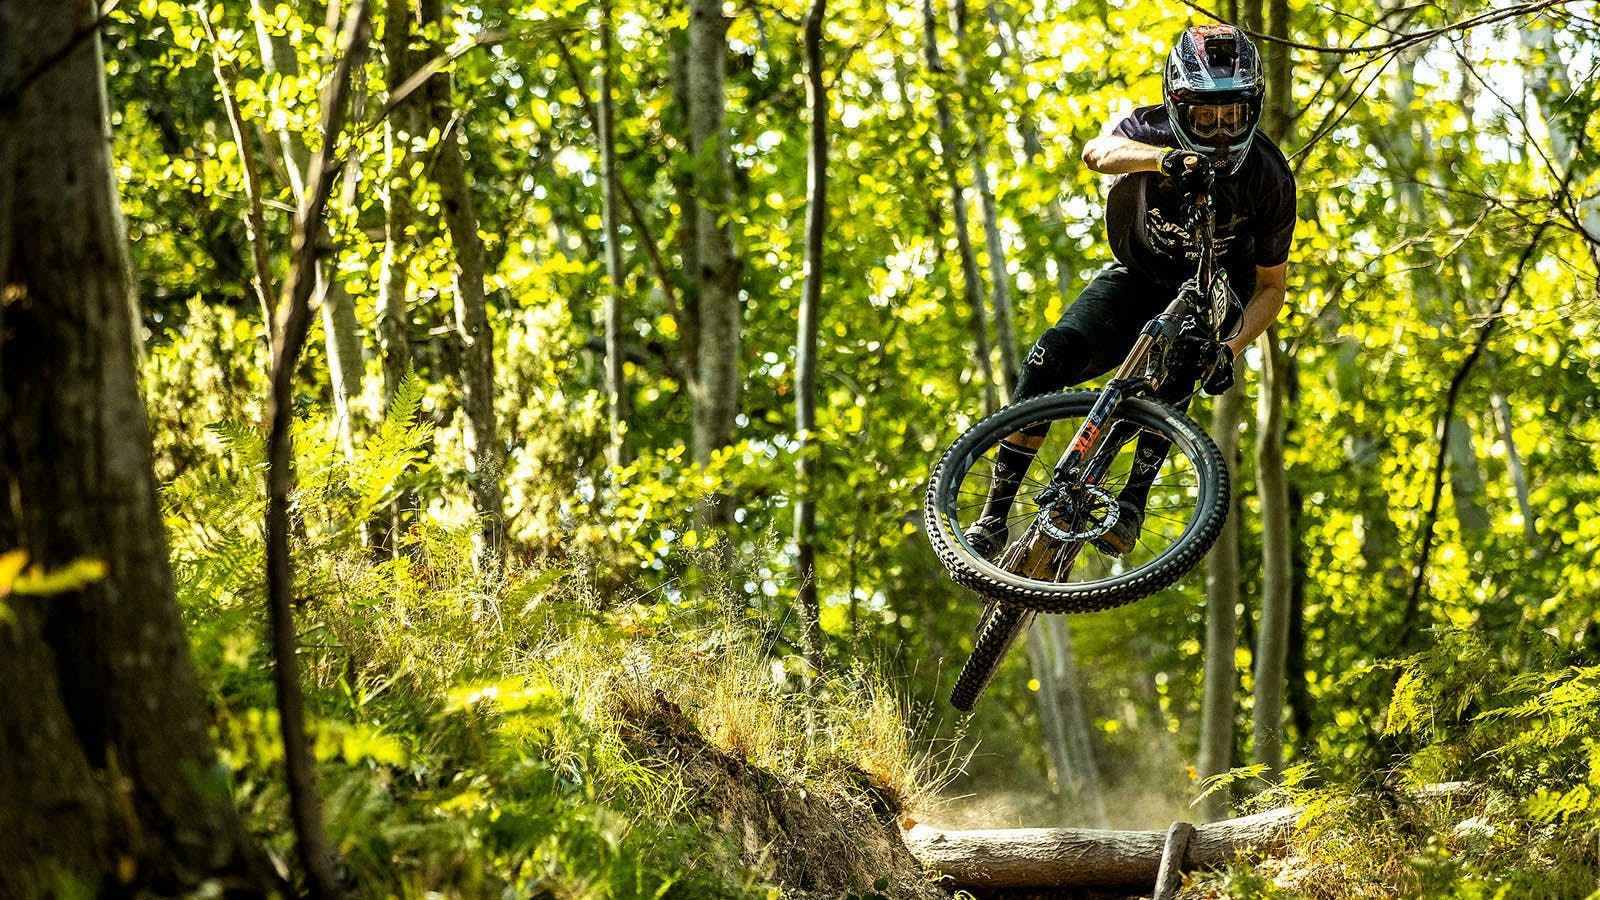 Mark Scott jumping his mountain bike in the woods